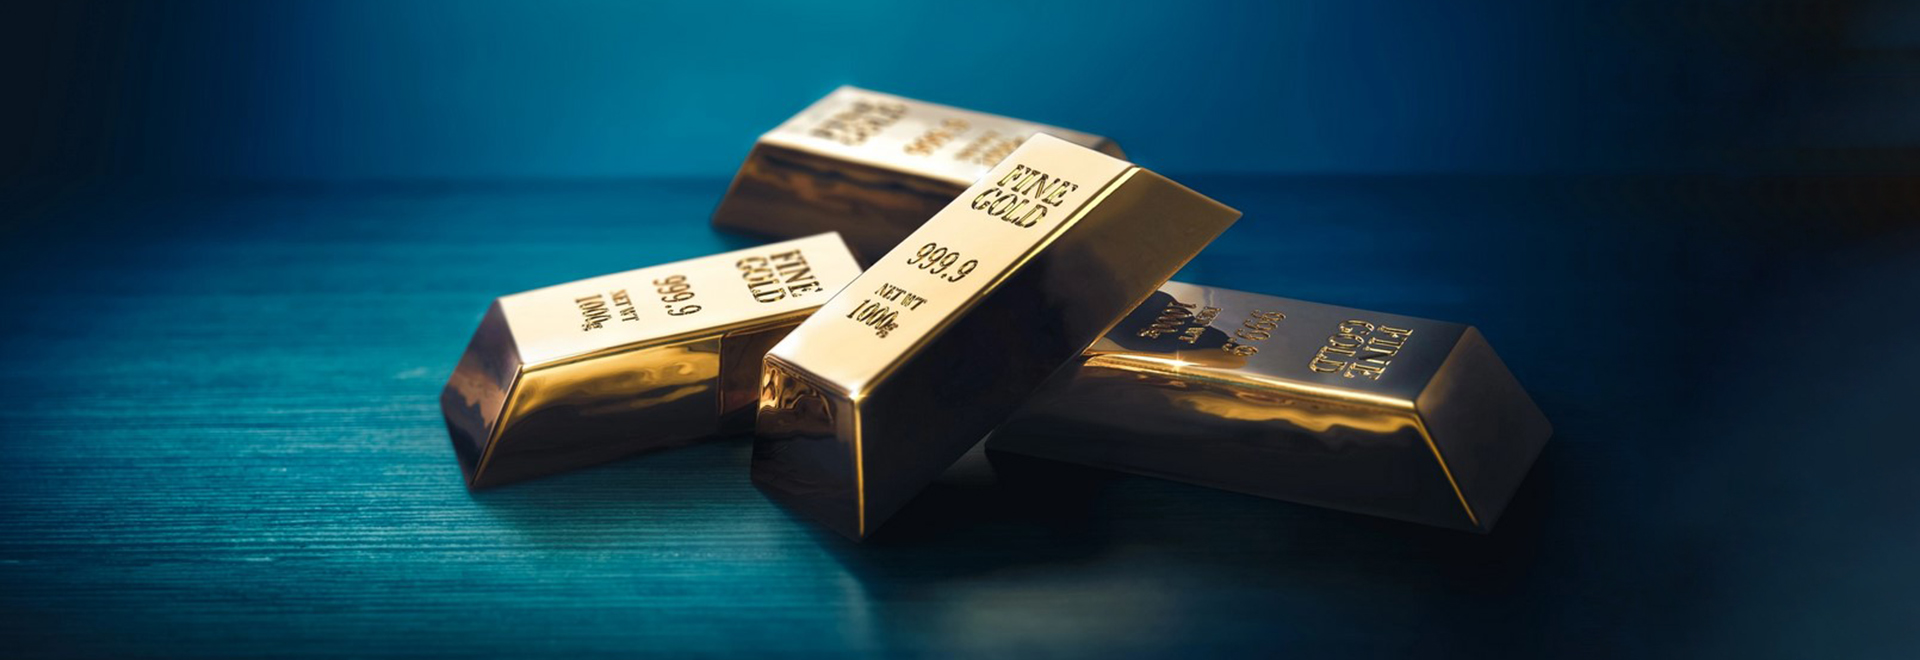 Gold Edges Higher Supported by Softer Dollar